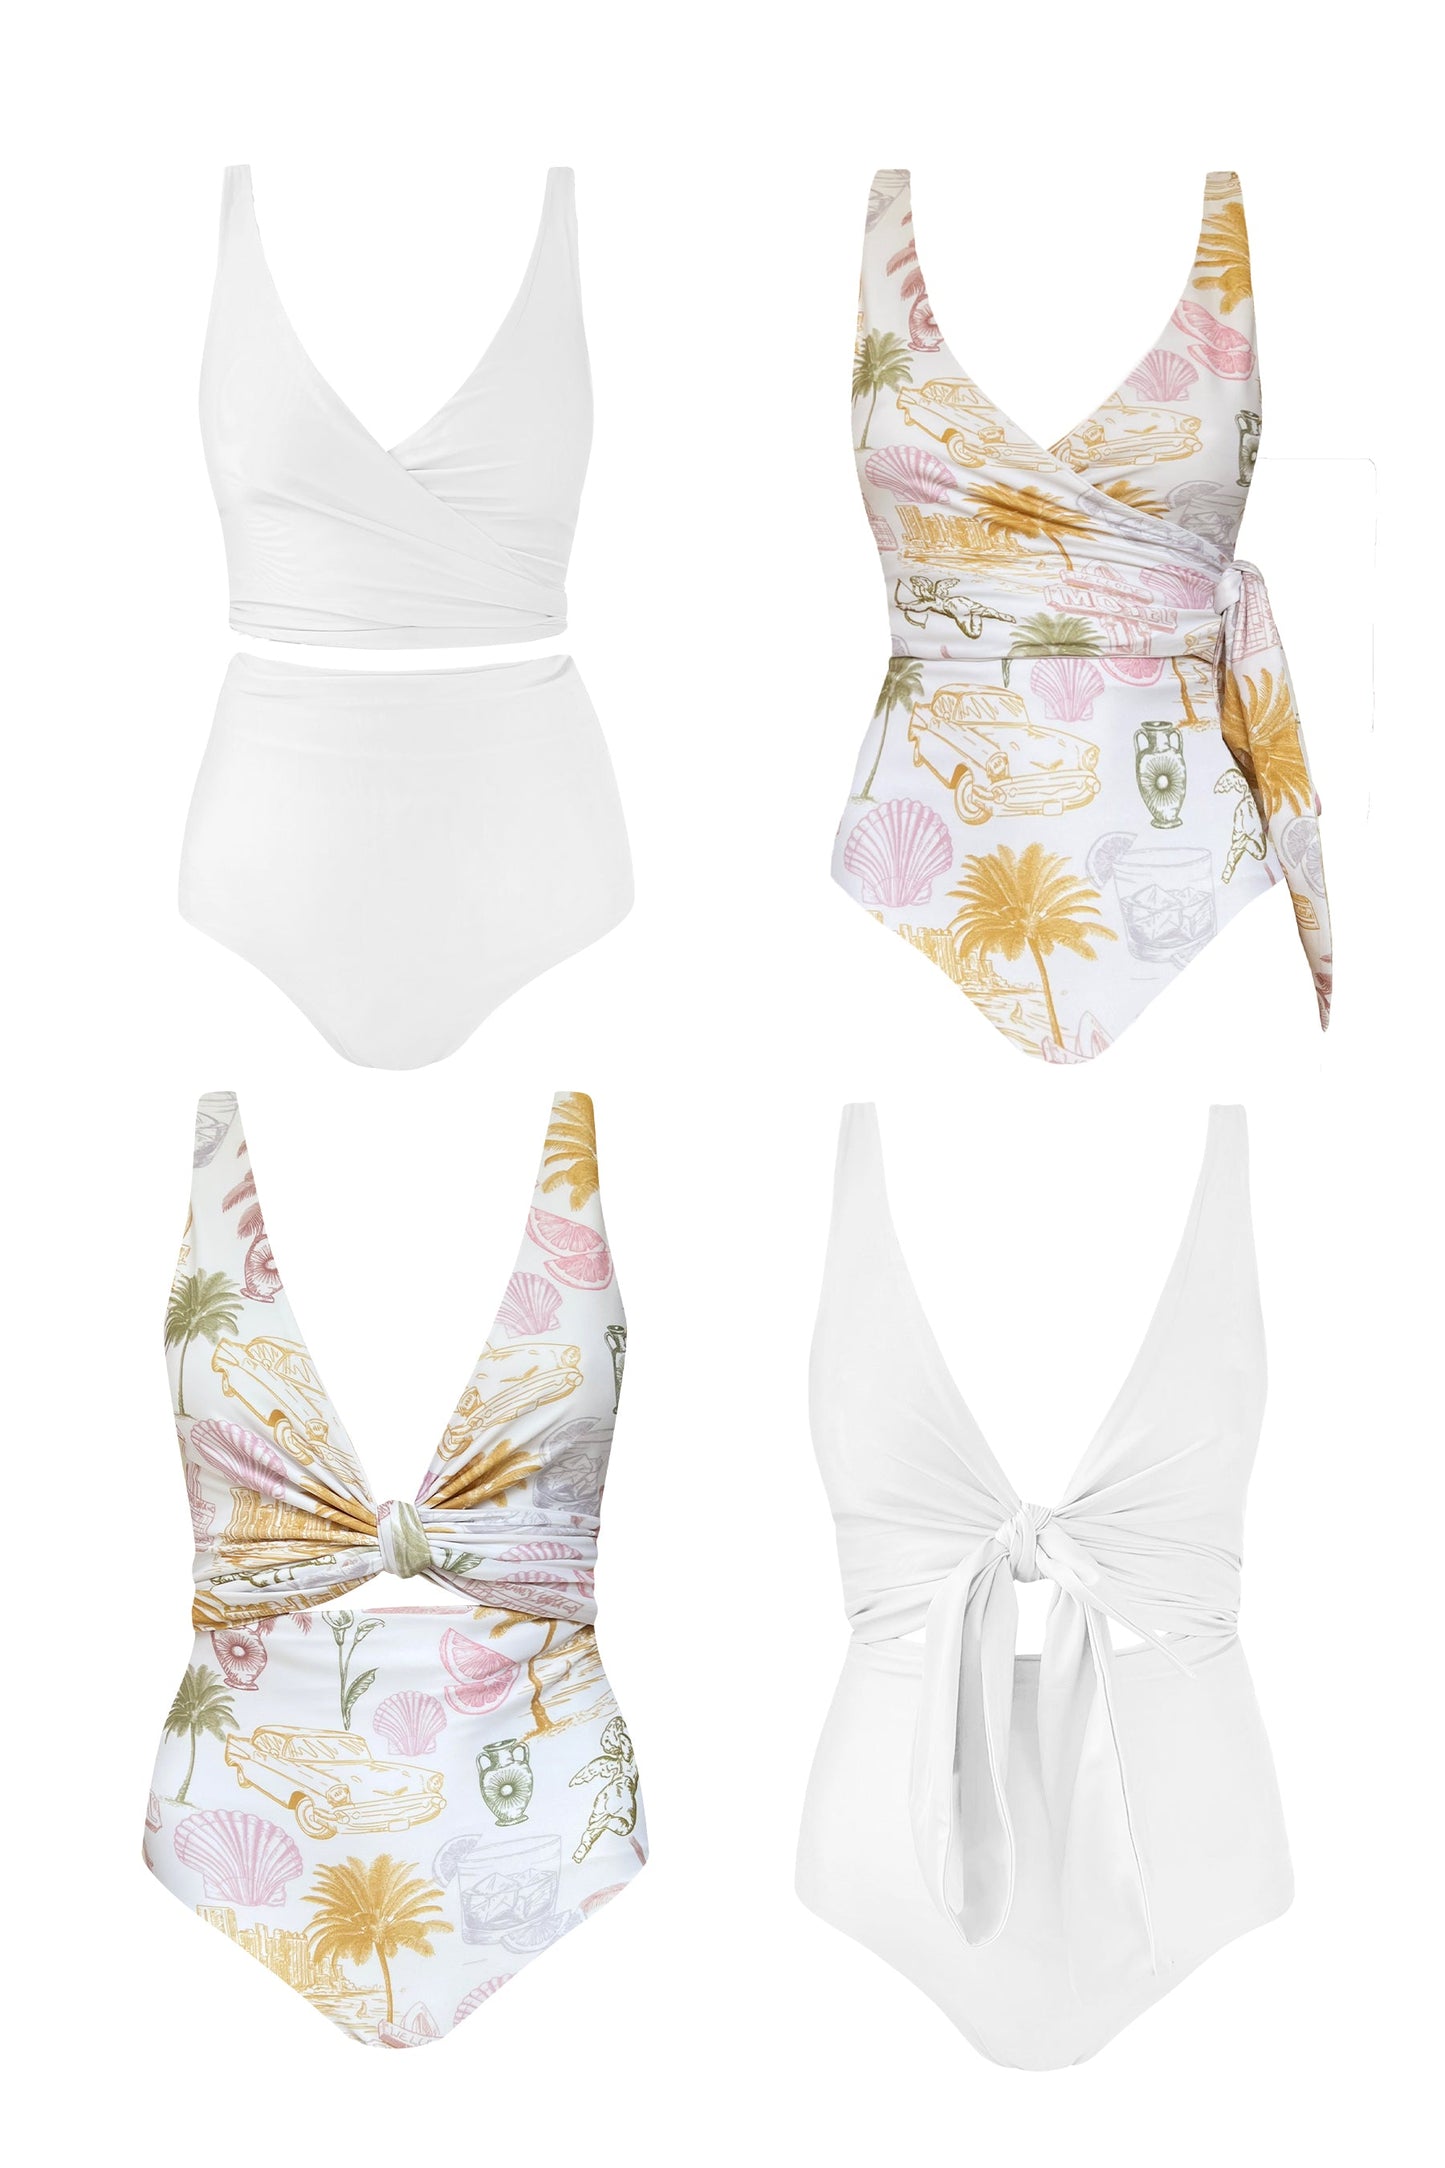 Product image of four different looks that can be made with just one Havana bikini